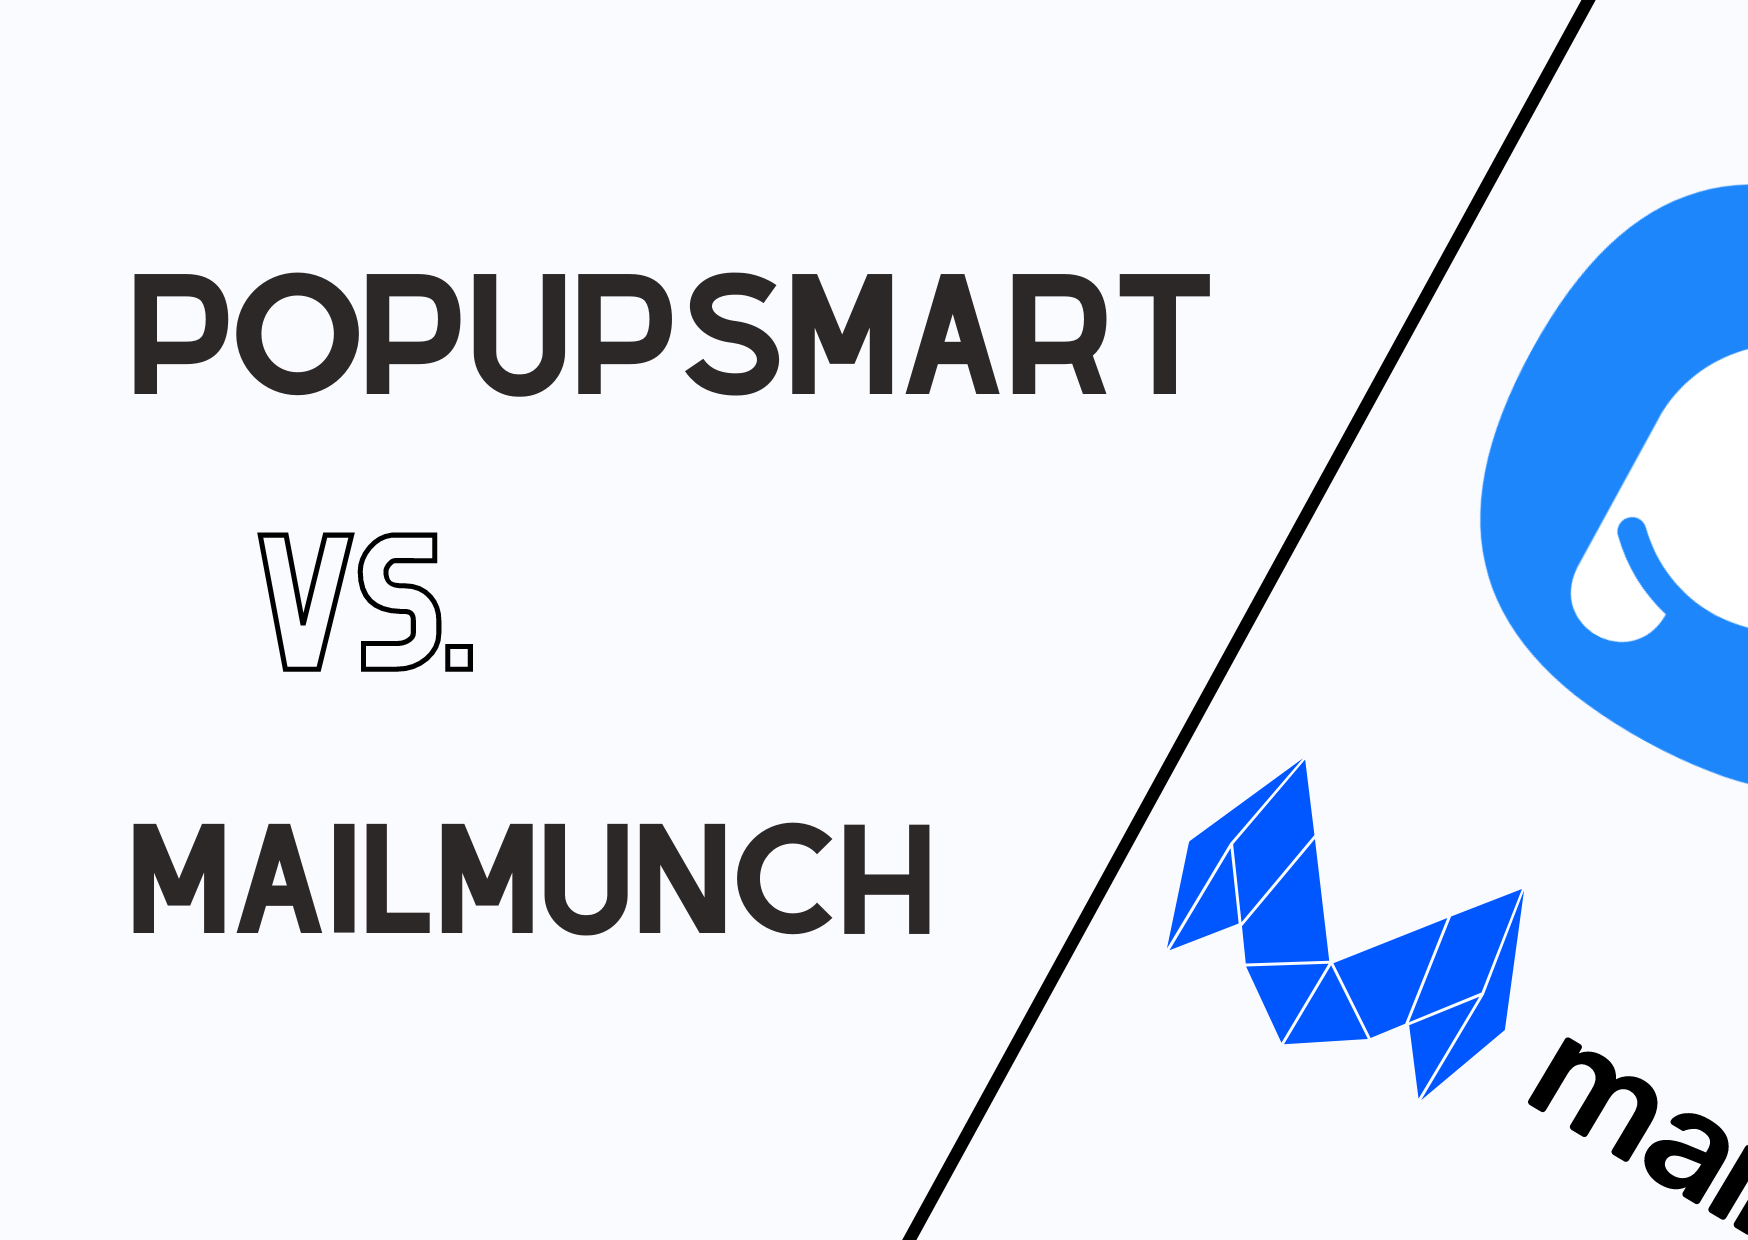 the logos of Popupsmart and Mailmunch with the title